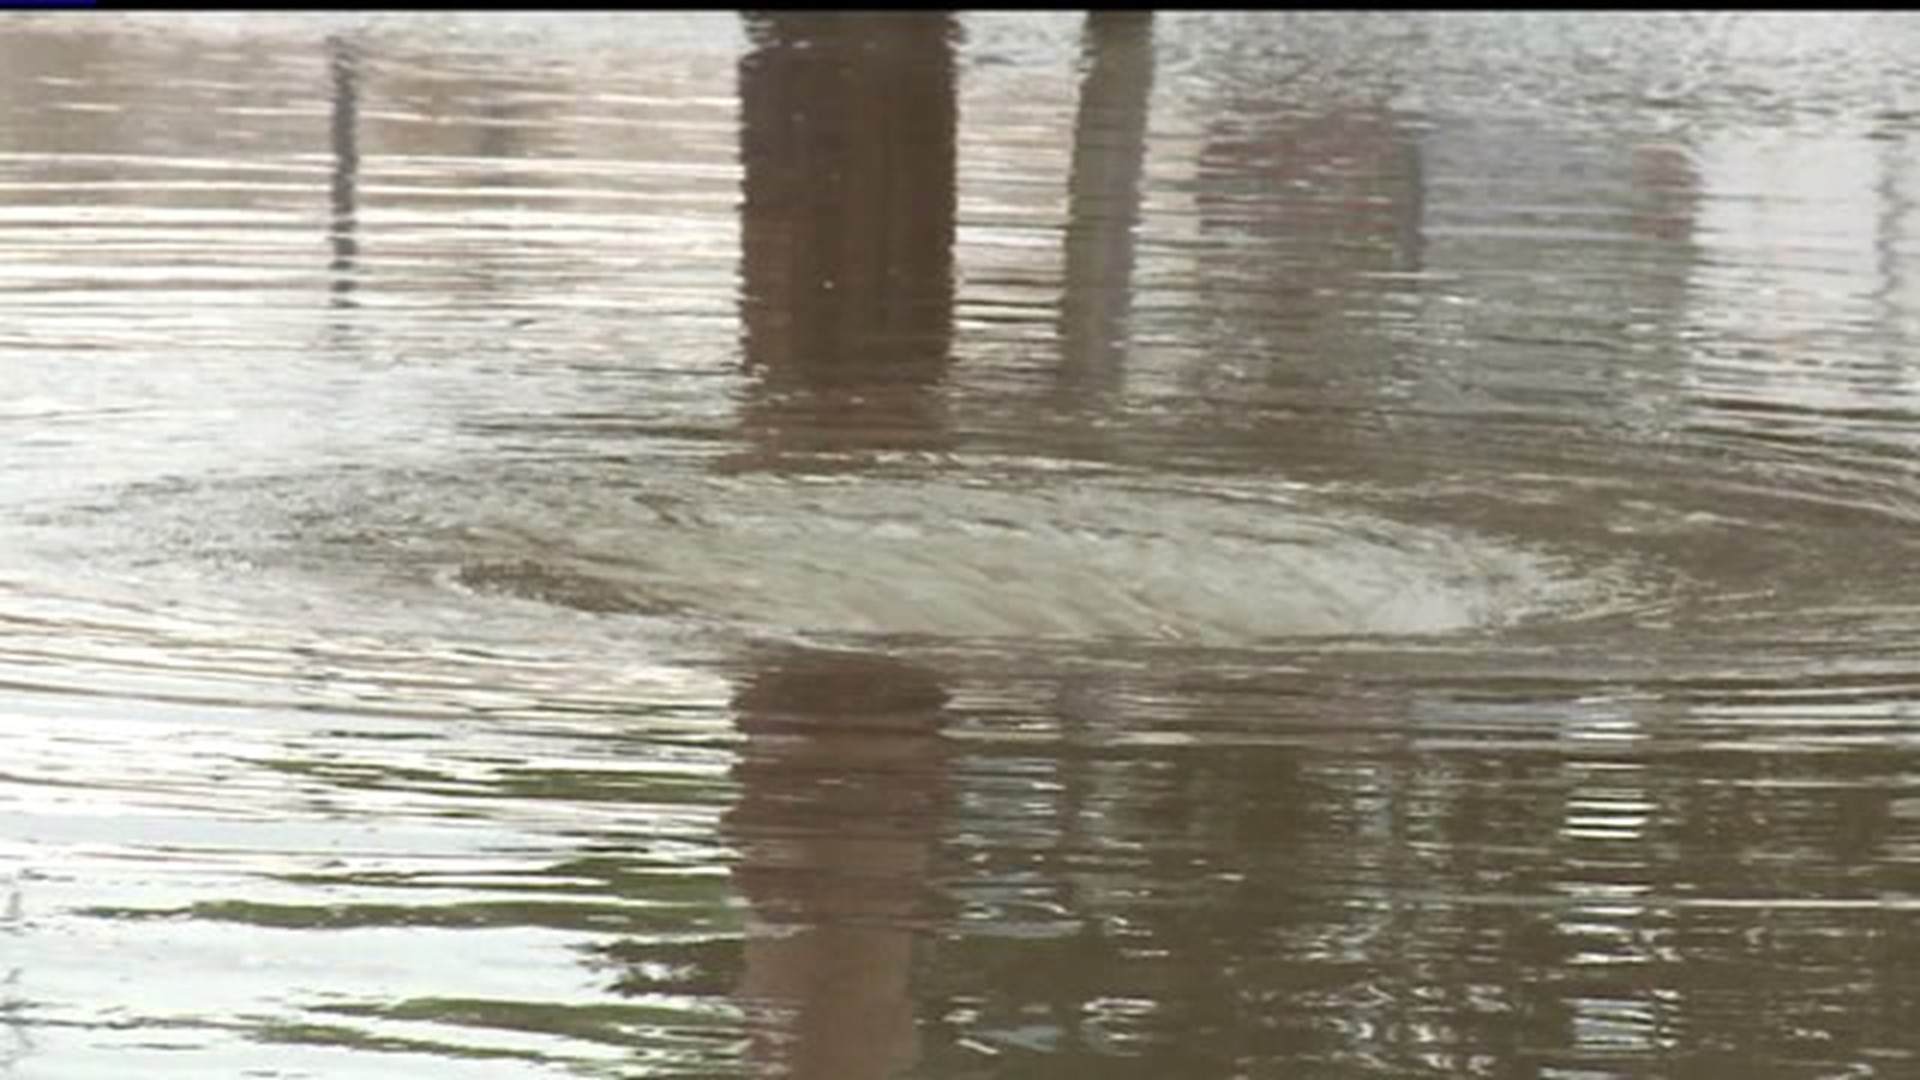 A major water main break leads to boil water advisories in Dauphin and Perry Counties